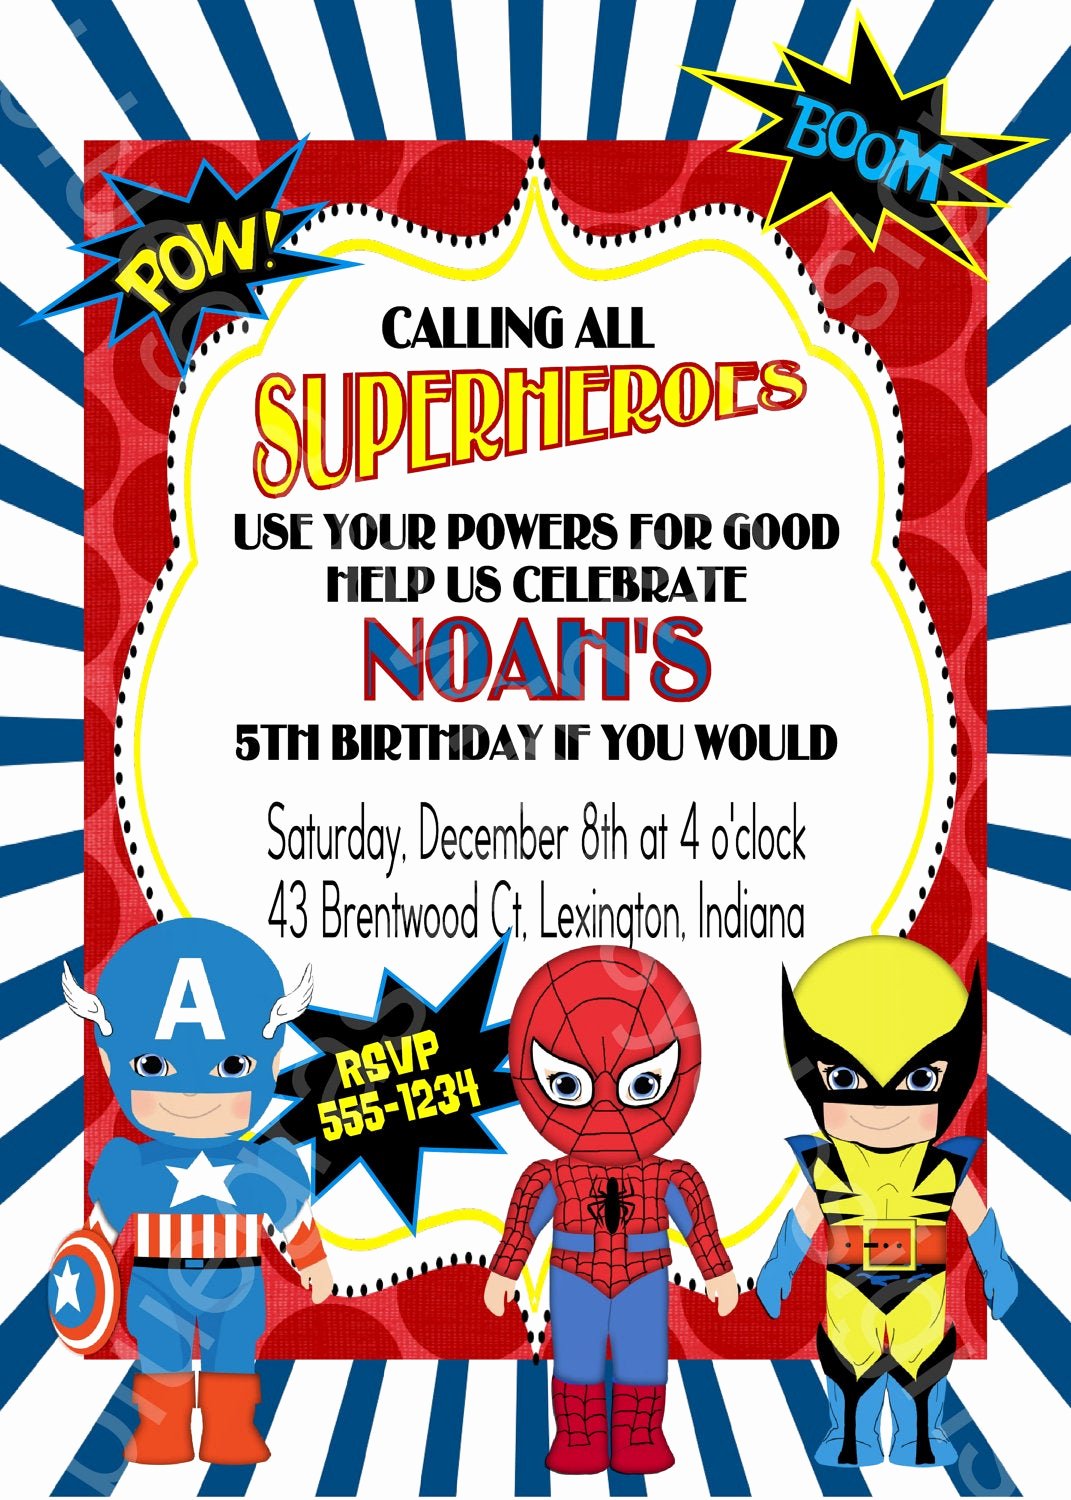 Super Hero Birthday Invitations Awesome Calling All Superheroes Birthday Party Invitation Boy or